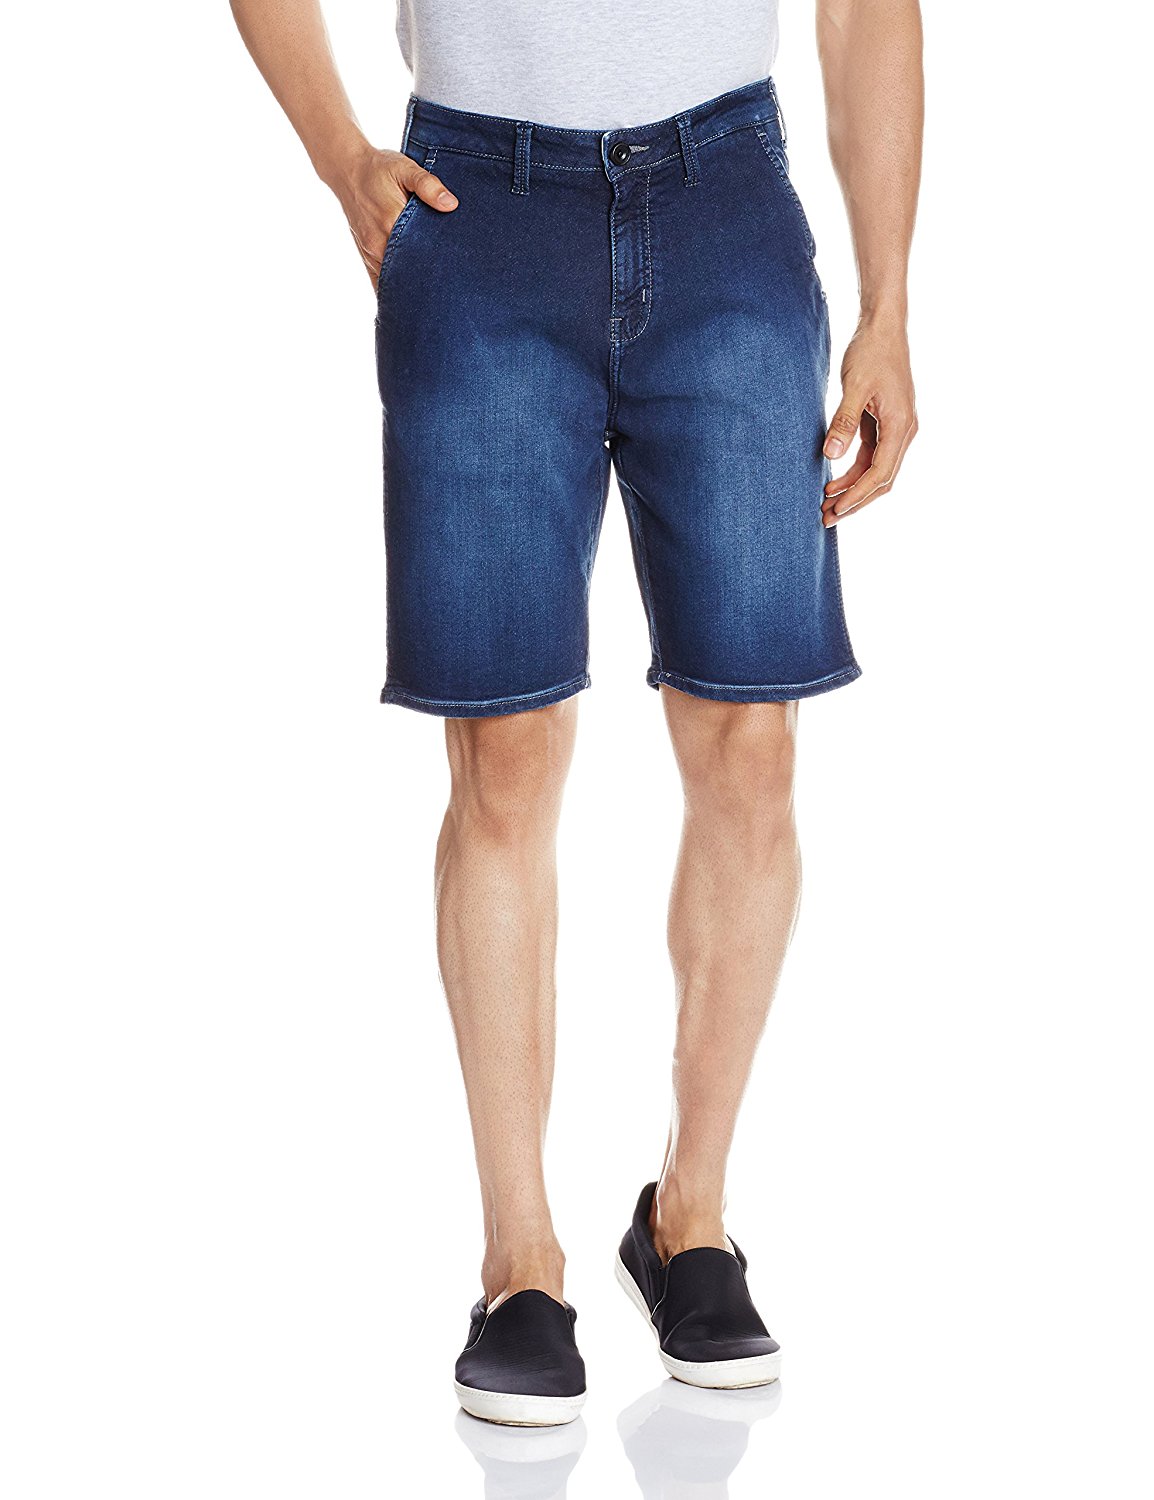 Amazon: Buy Wrangler Men’s Cotton Shorts at Rs 539 only